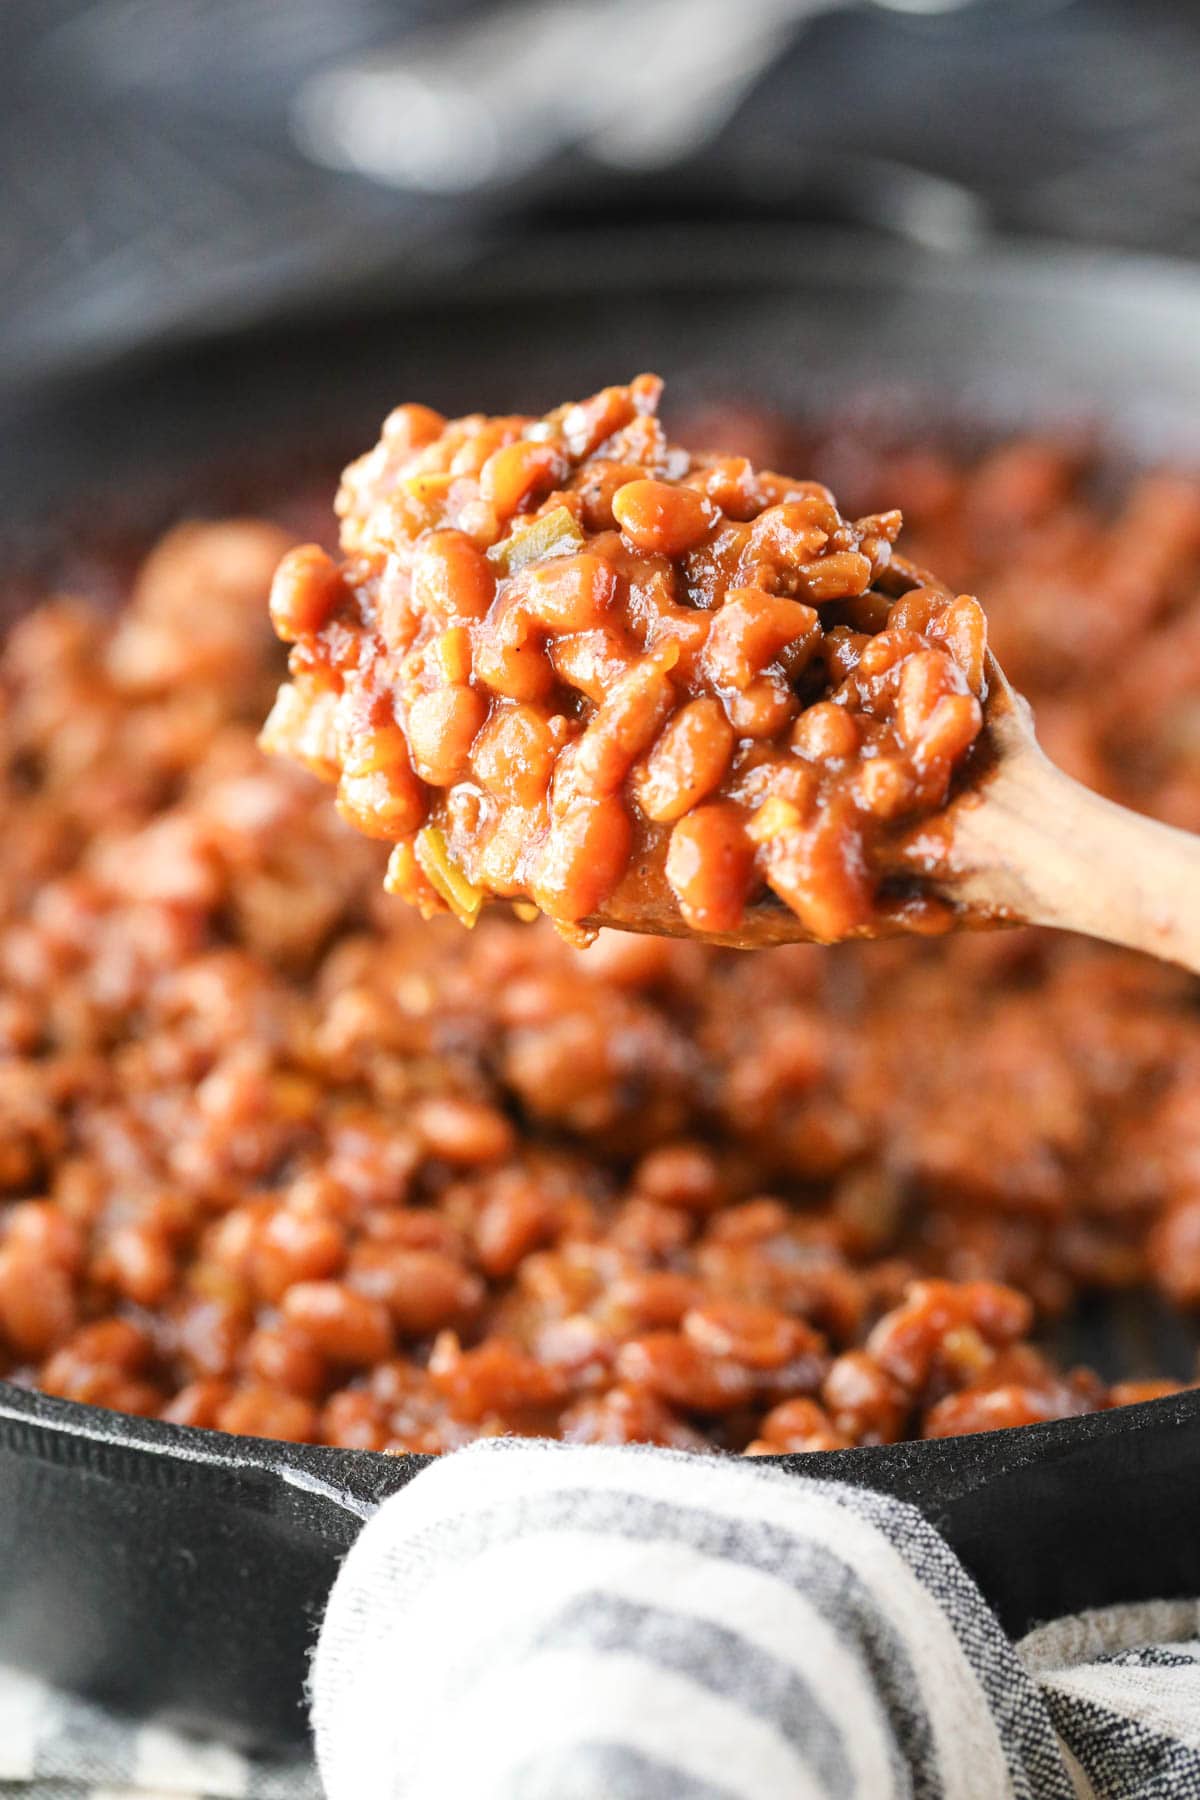 A spoonful of Southern baked beans being held over a cast-iron skillet.